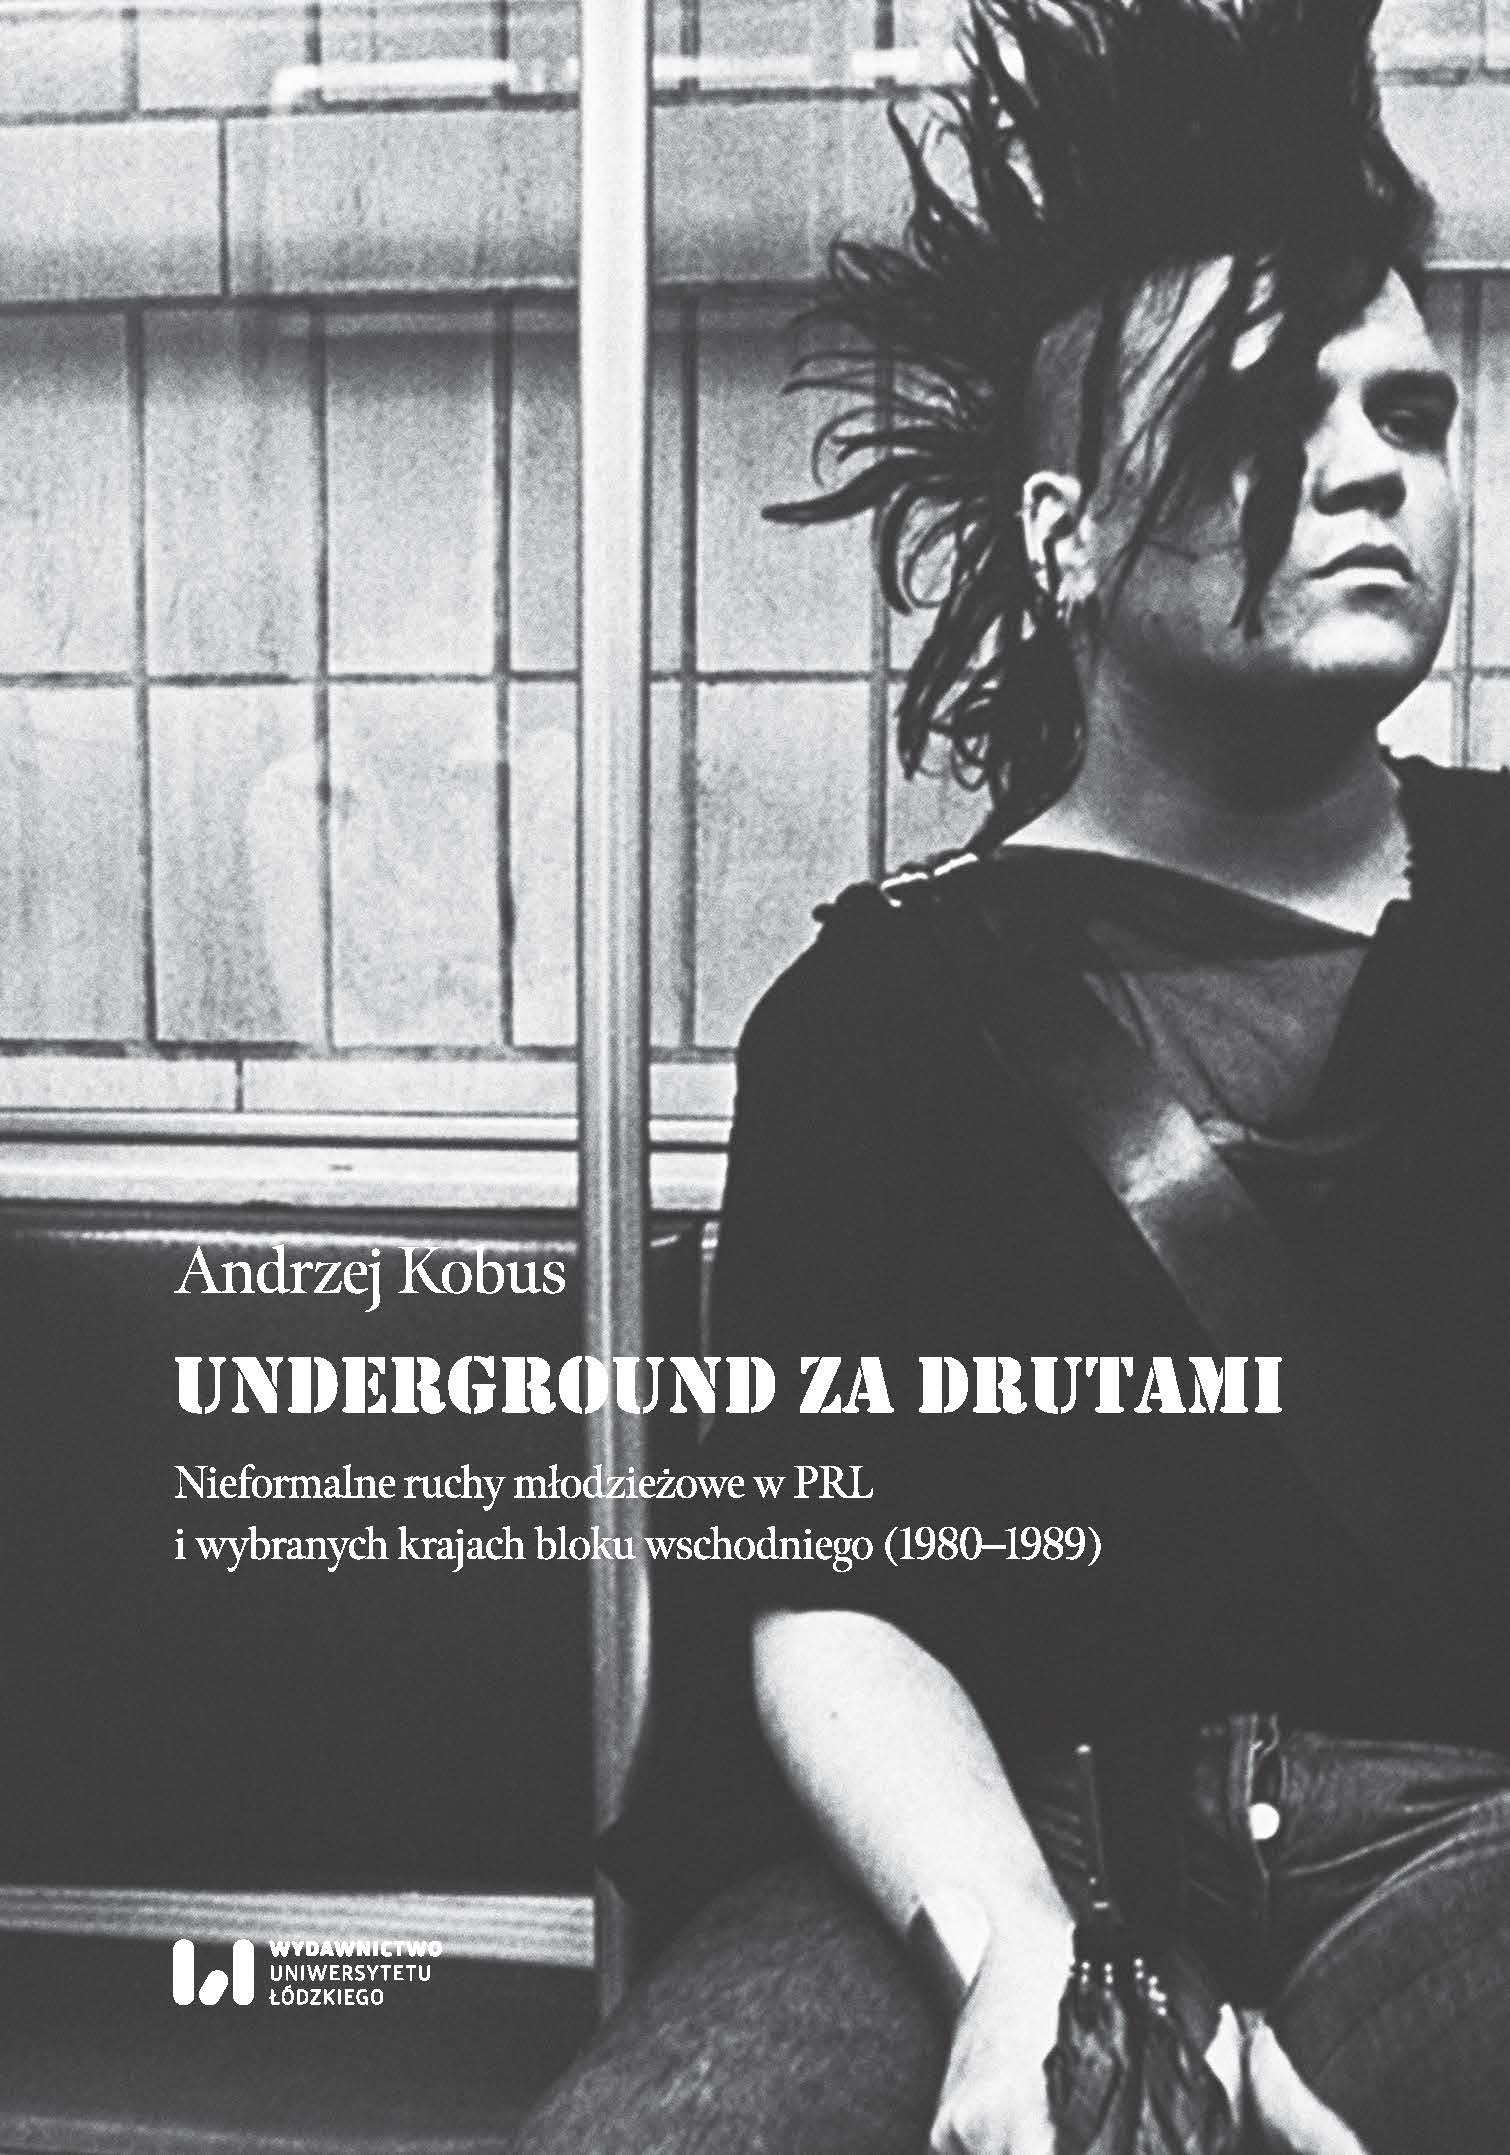 Underground behind the wires. Informal youth movements in the selected Eastern Bloc countries in the 1980s